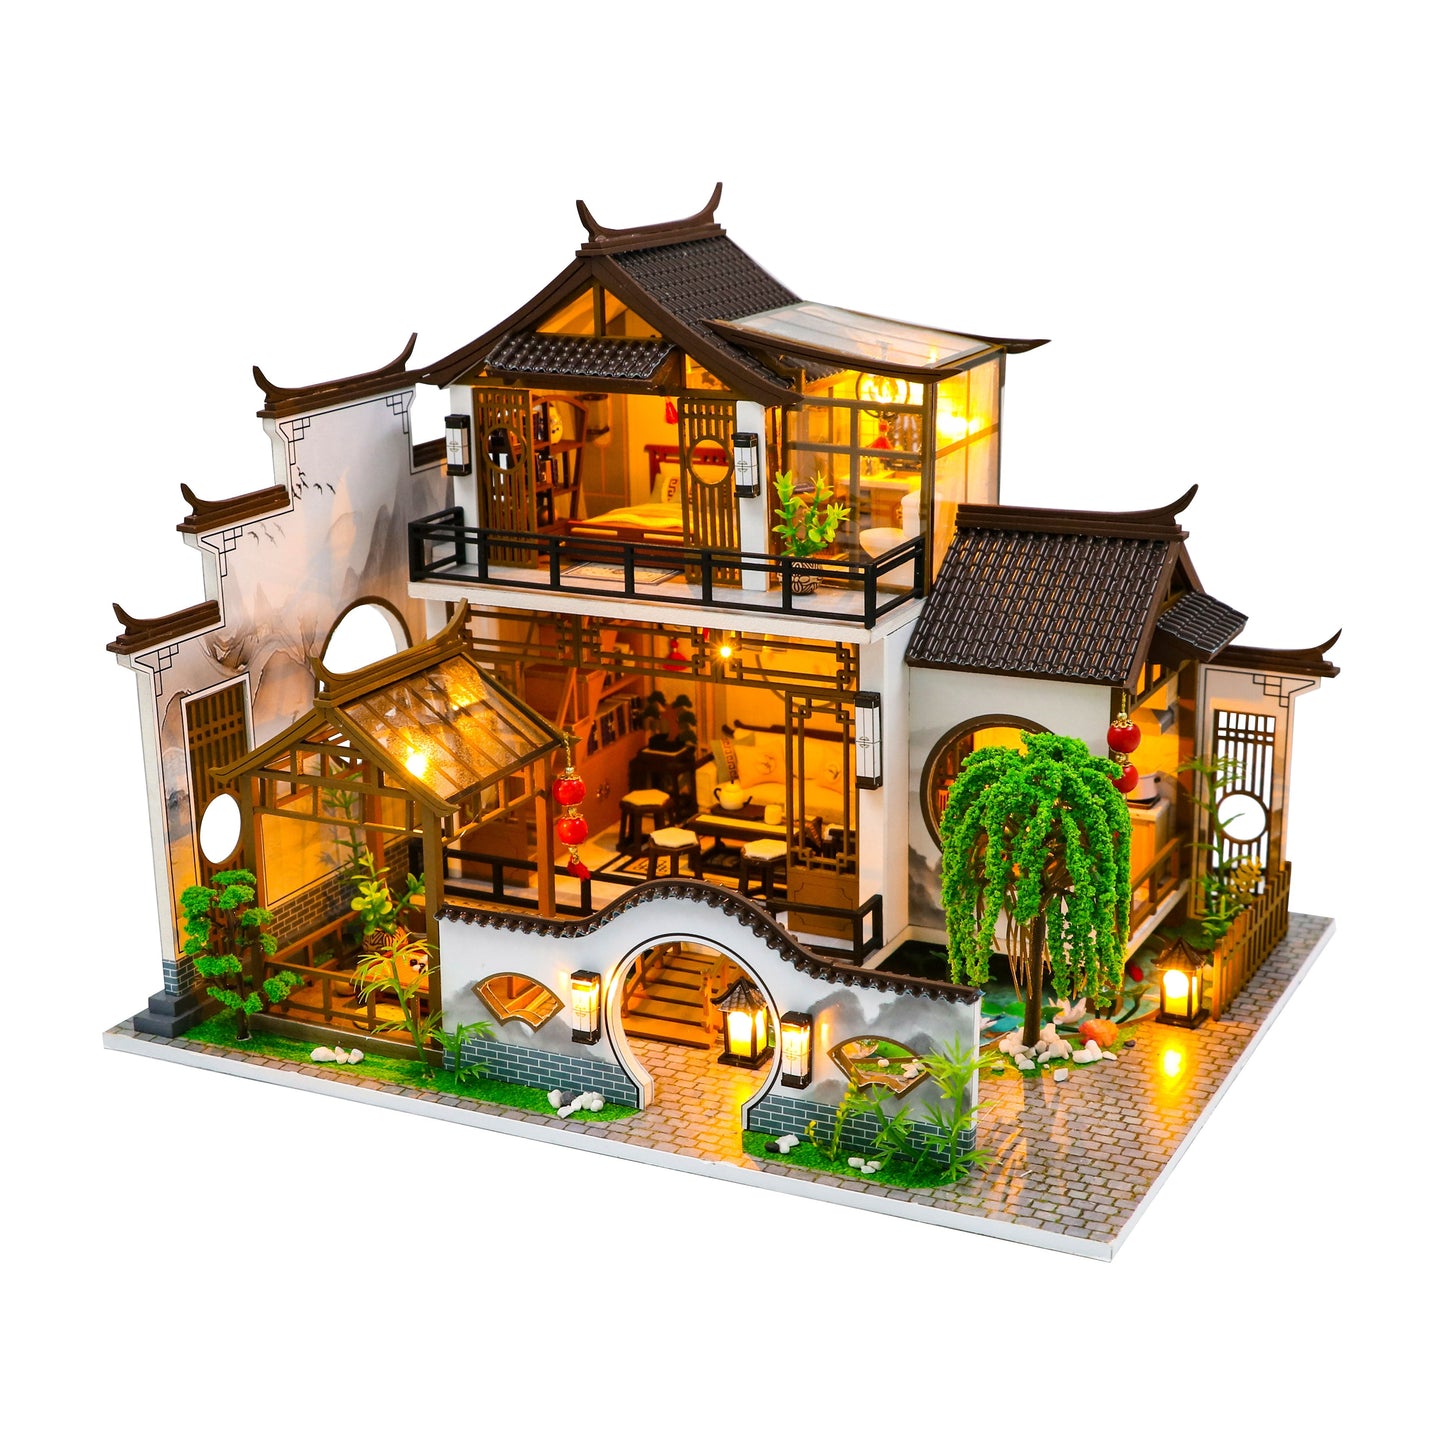 Poetic Charm PC2314 w/LED Lights and Glues, Wooden Miniature Dollhouse Furniture Kits